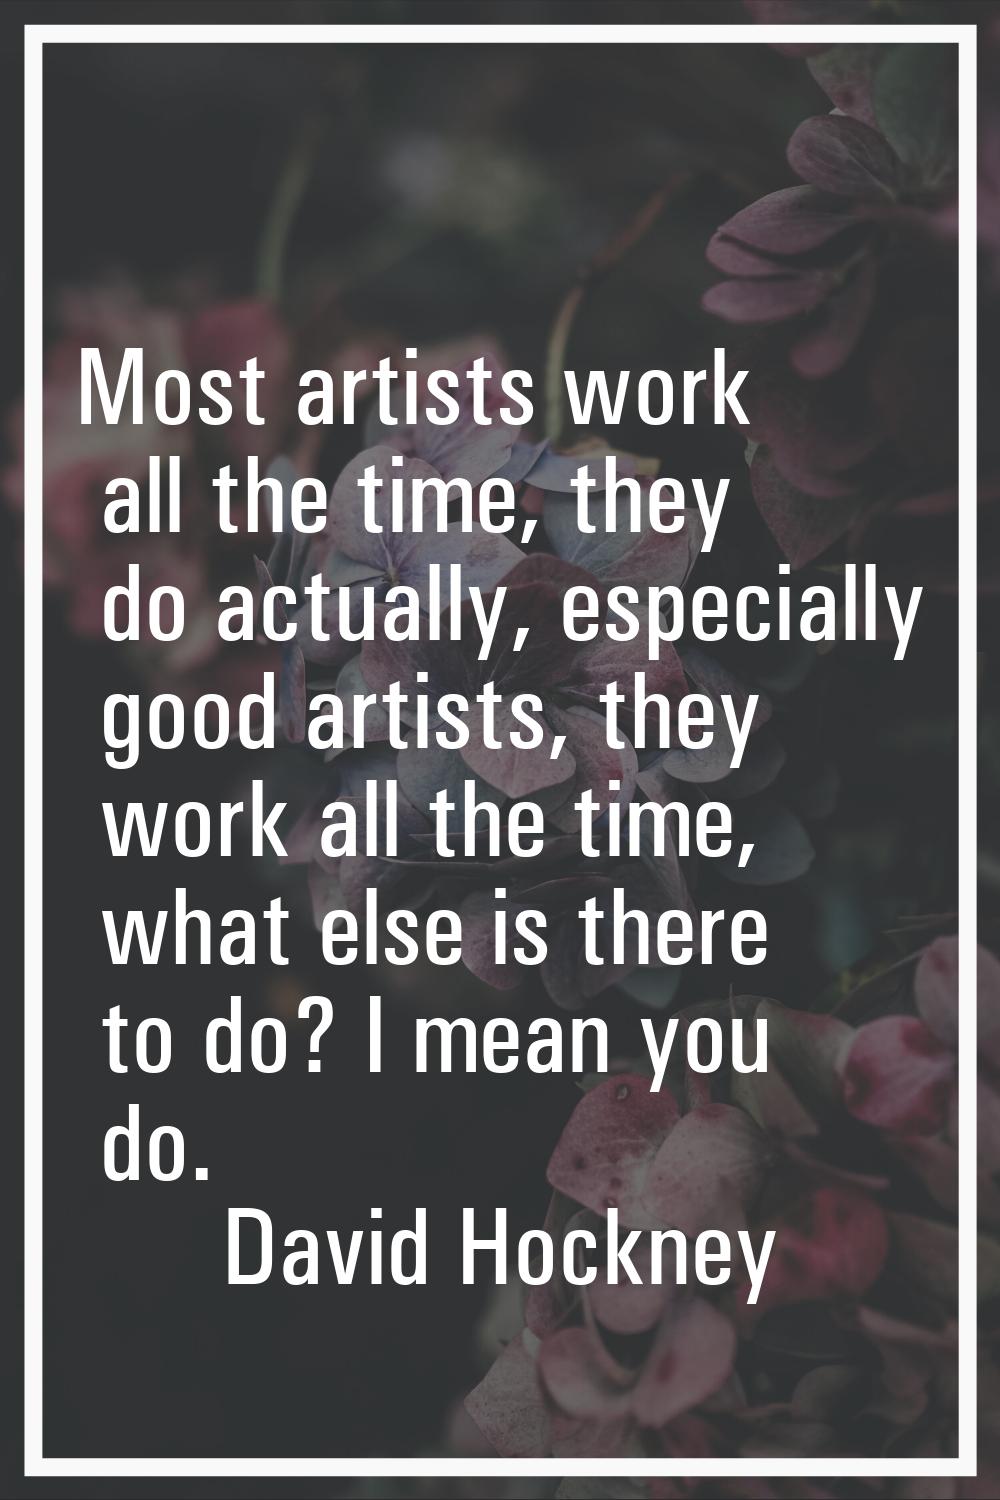 Most artists work all the time, they do actually, especially good artists, they work all the time, 